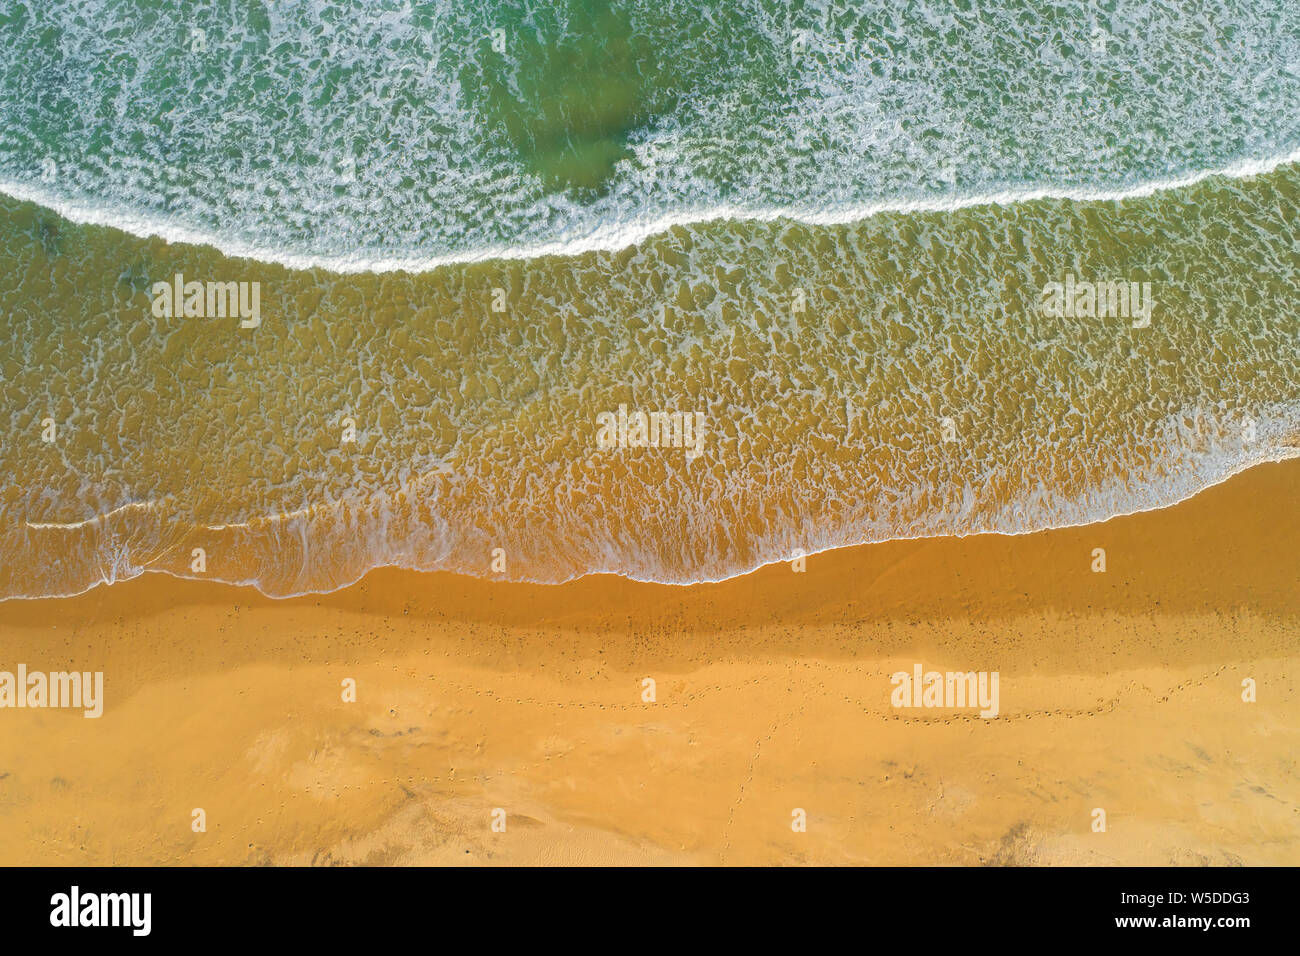 Aerial view of ocean waves on a sandy beach, southern Africa Stock Photo